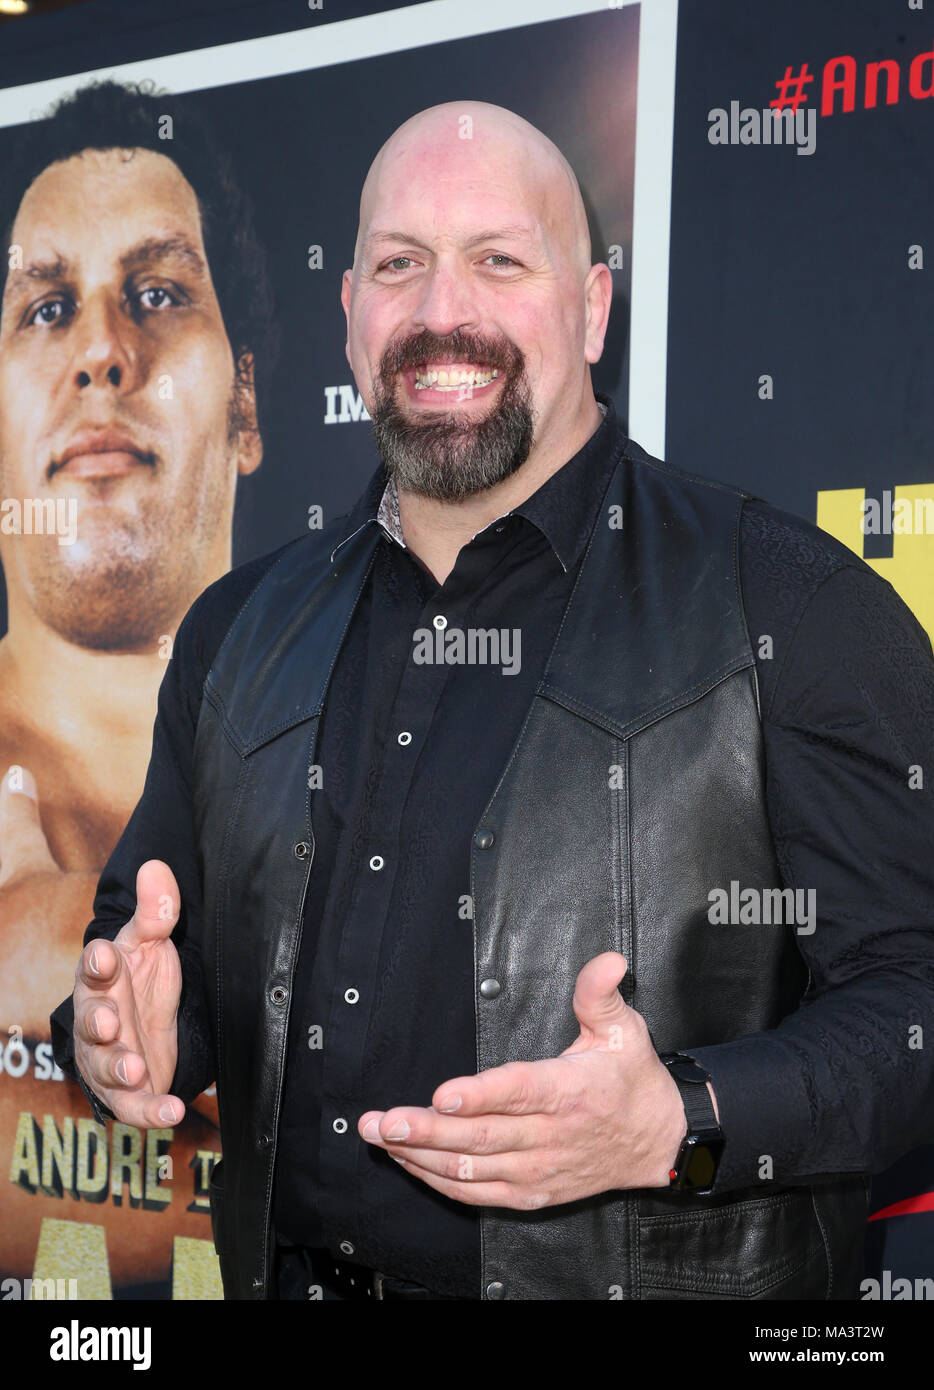 Hollywood, Ca. 29th Mar, 2018. Big Show, Paul Donald Wight II, at Los Angeles Premiere of Andre The Giant from HBO Documentaries at Pacific Cinerama Dome in Hollywood, California on March 29, 2018. Credit: Faye Sadou/Media Punch/Alamy Live News Stock Photo